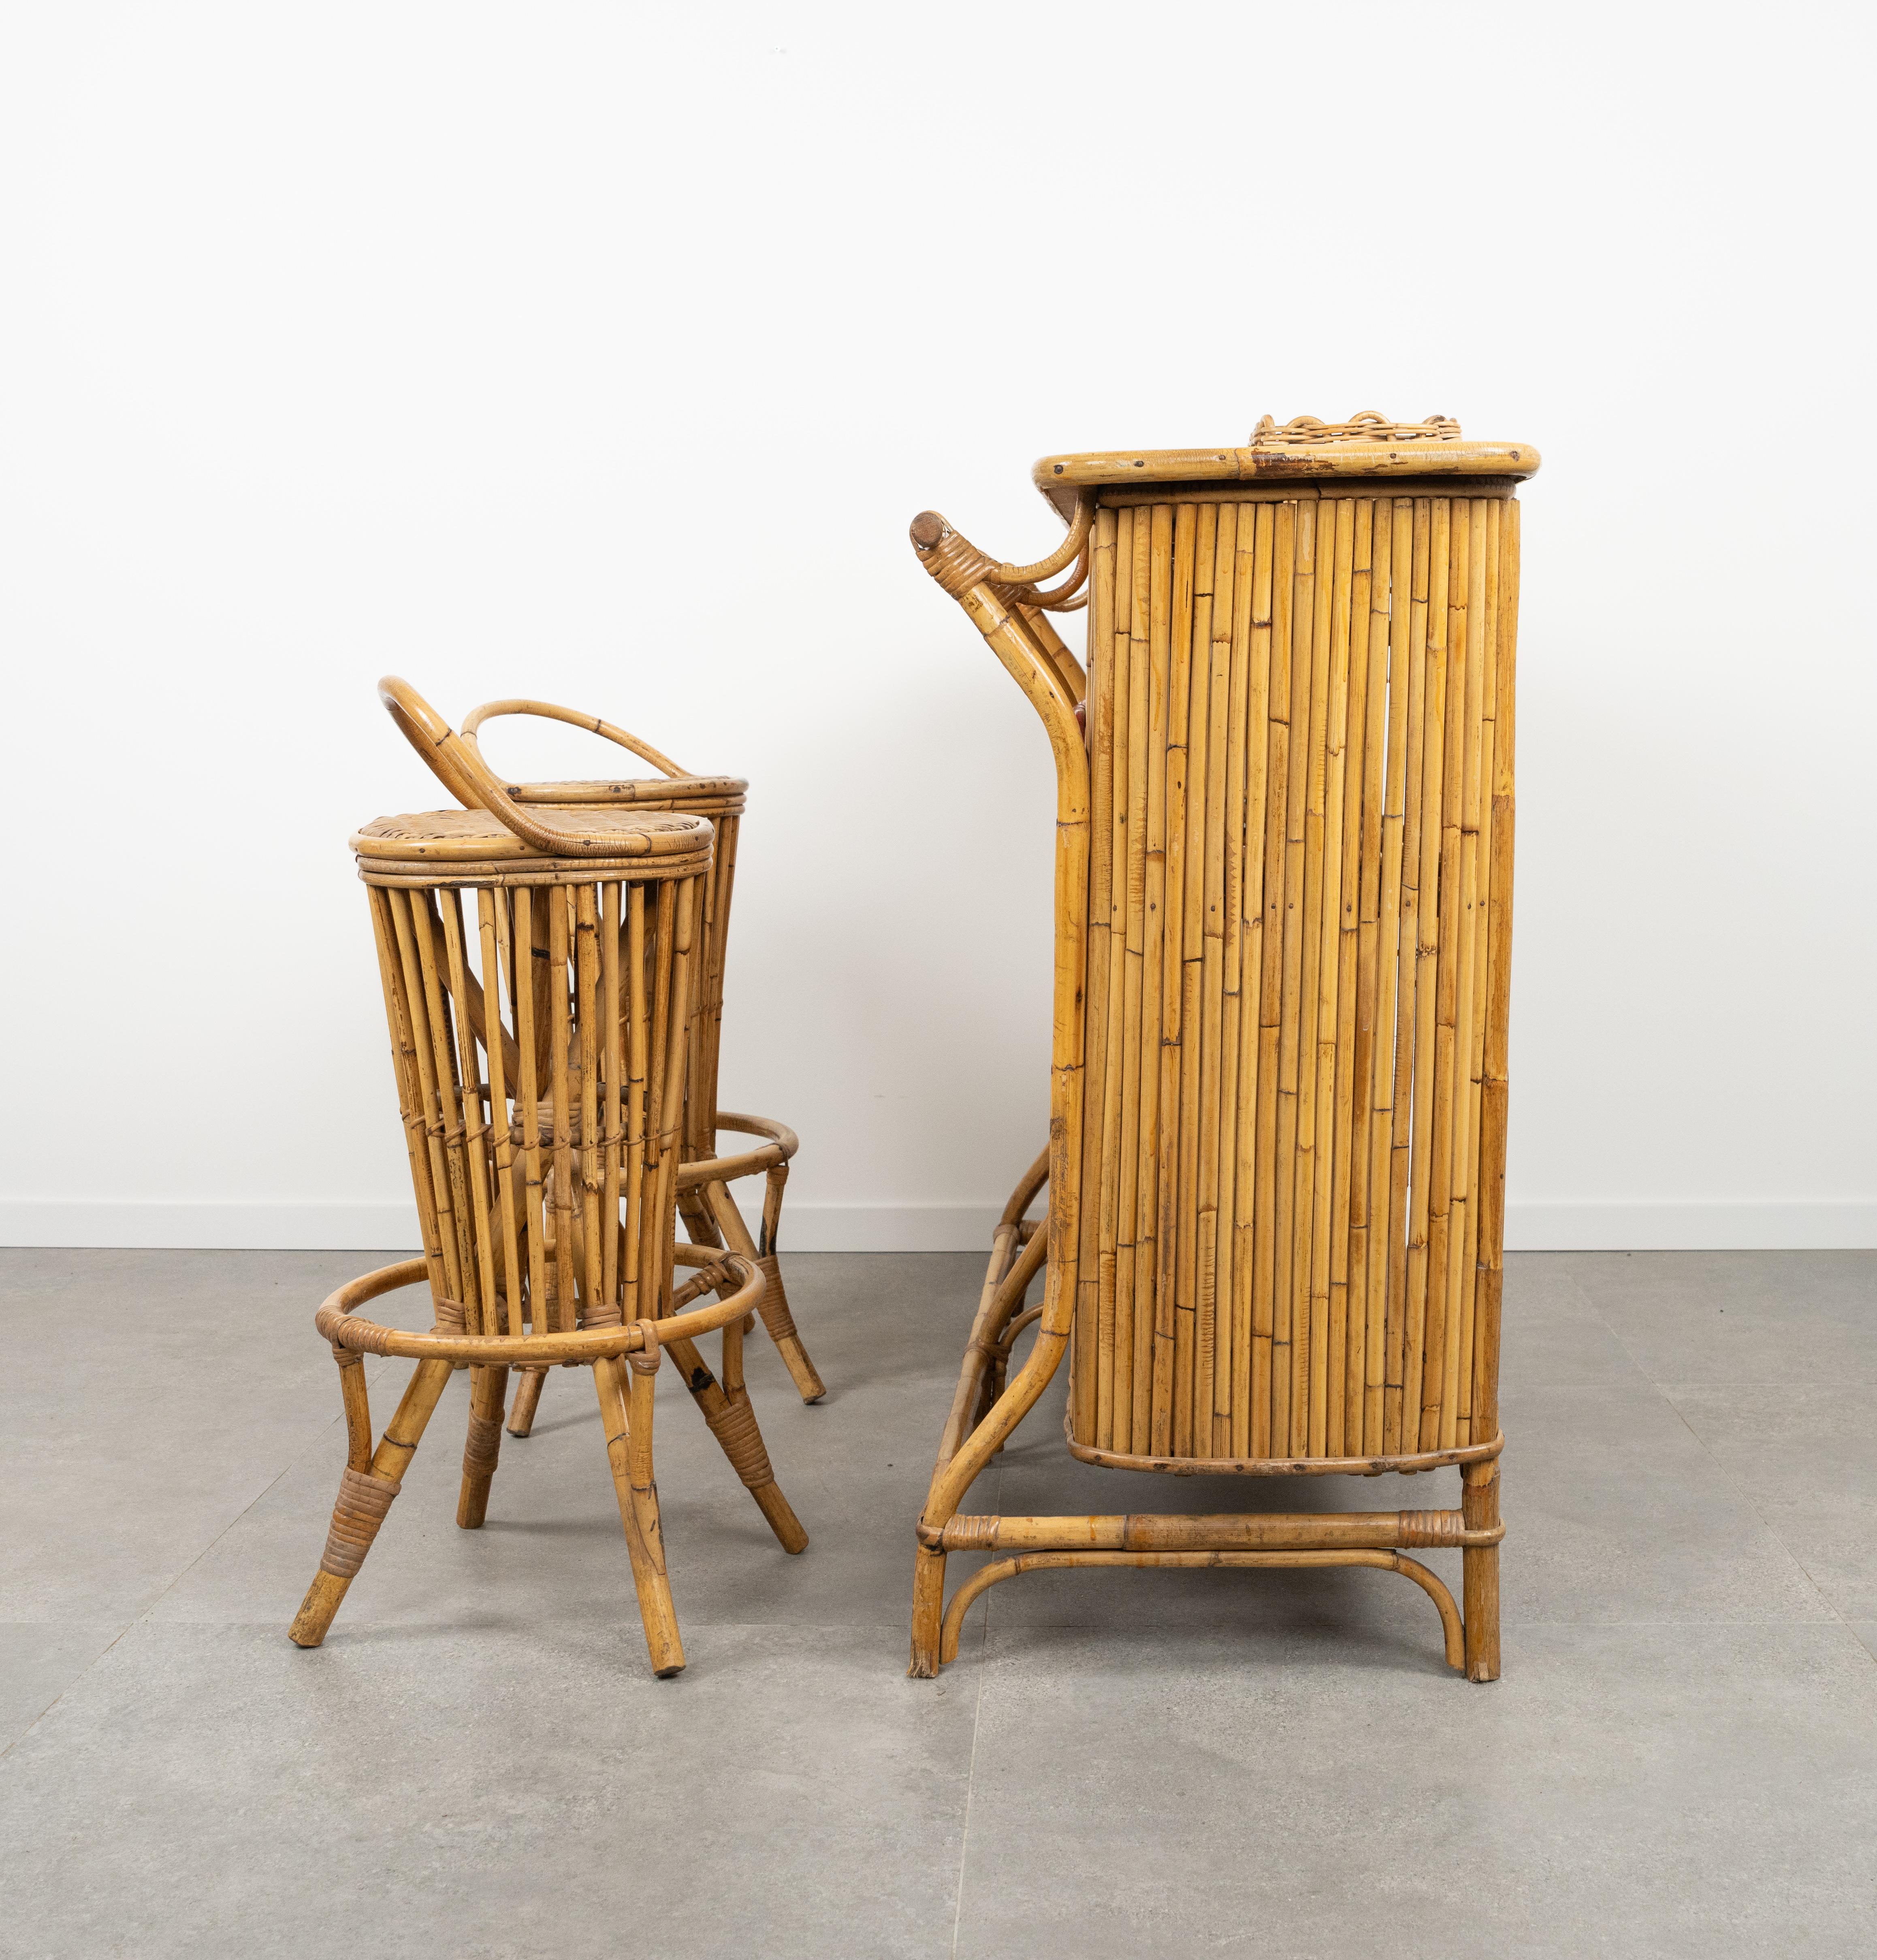 Bamboo and Rattan Cabinet Bar with Two Stools by Tito Agnoli, Italy 1950s For Sale 8